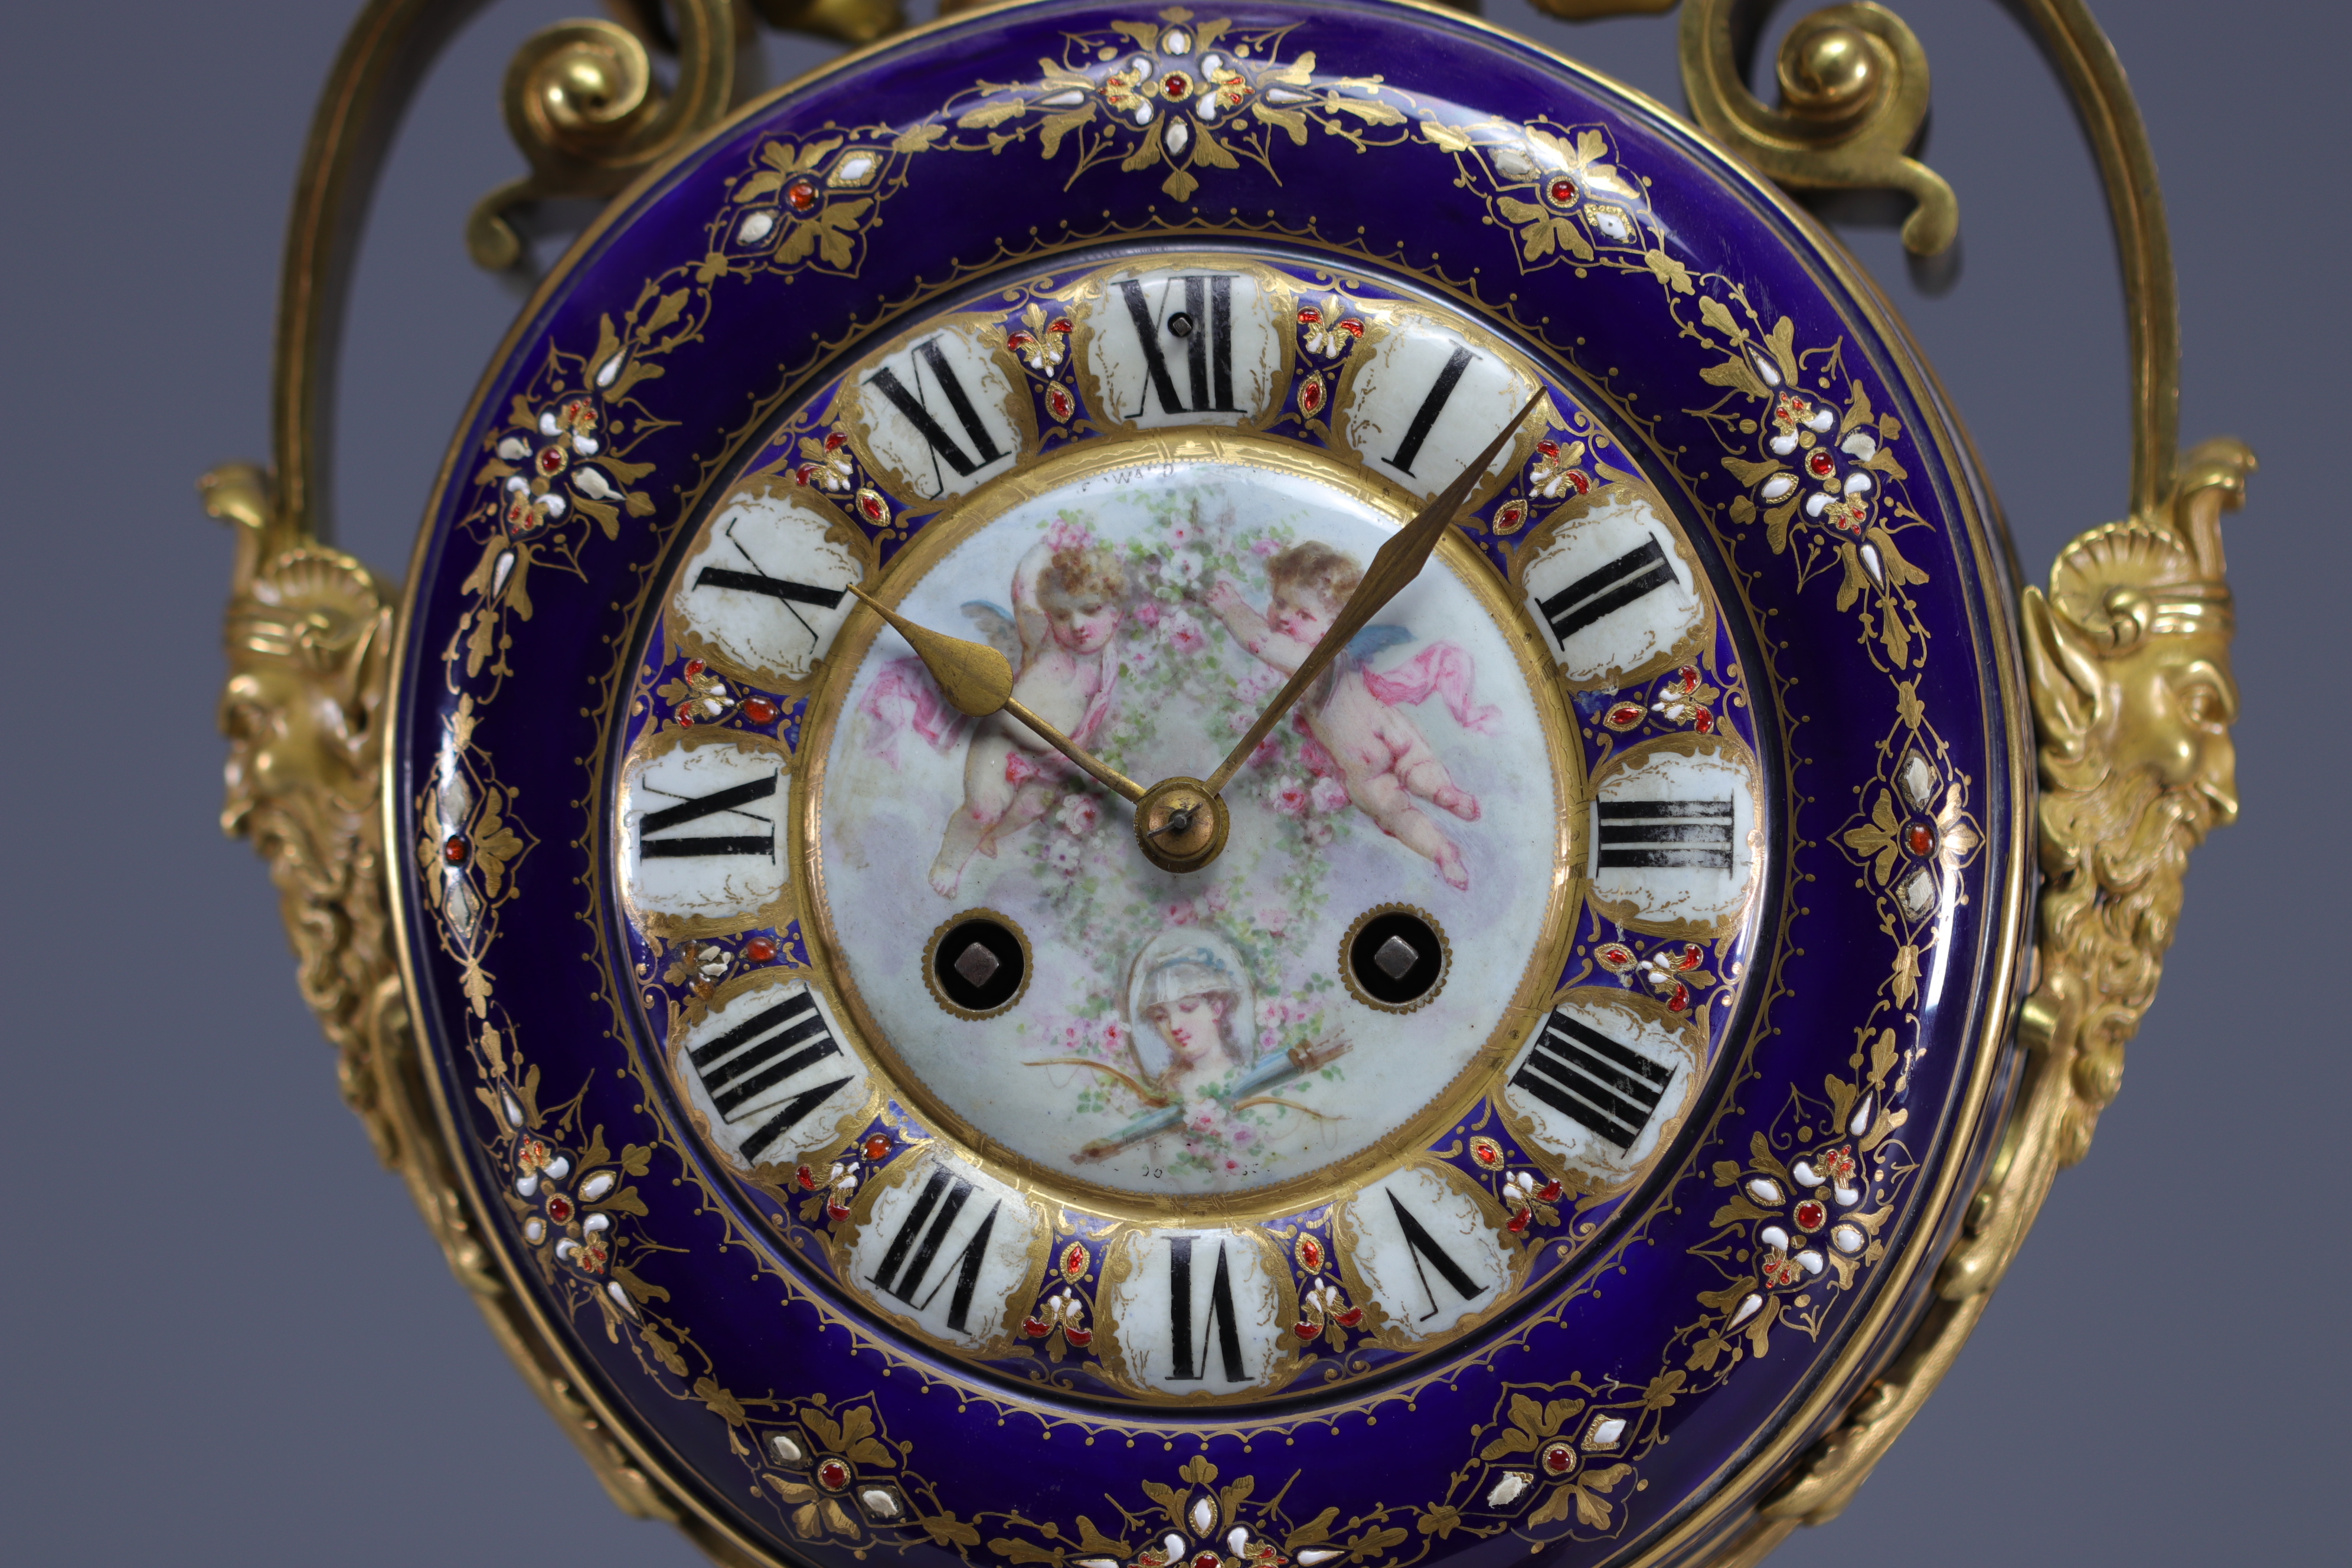 A rare Sevres porcelain and gilt bronze clock decorated with cherubs. - Image 6 of 8